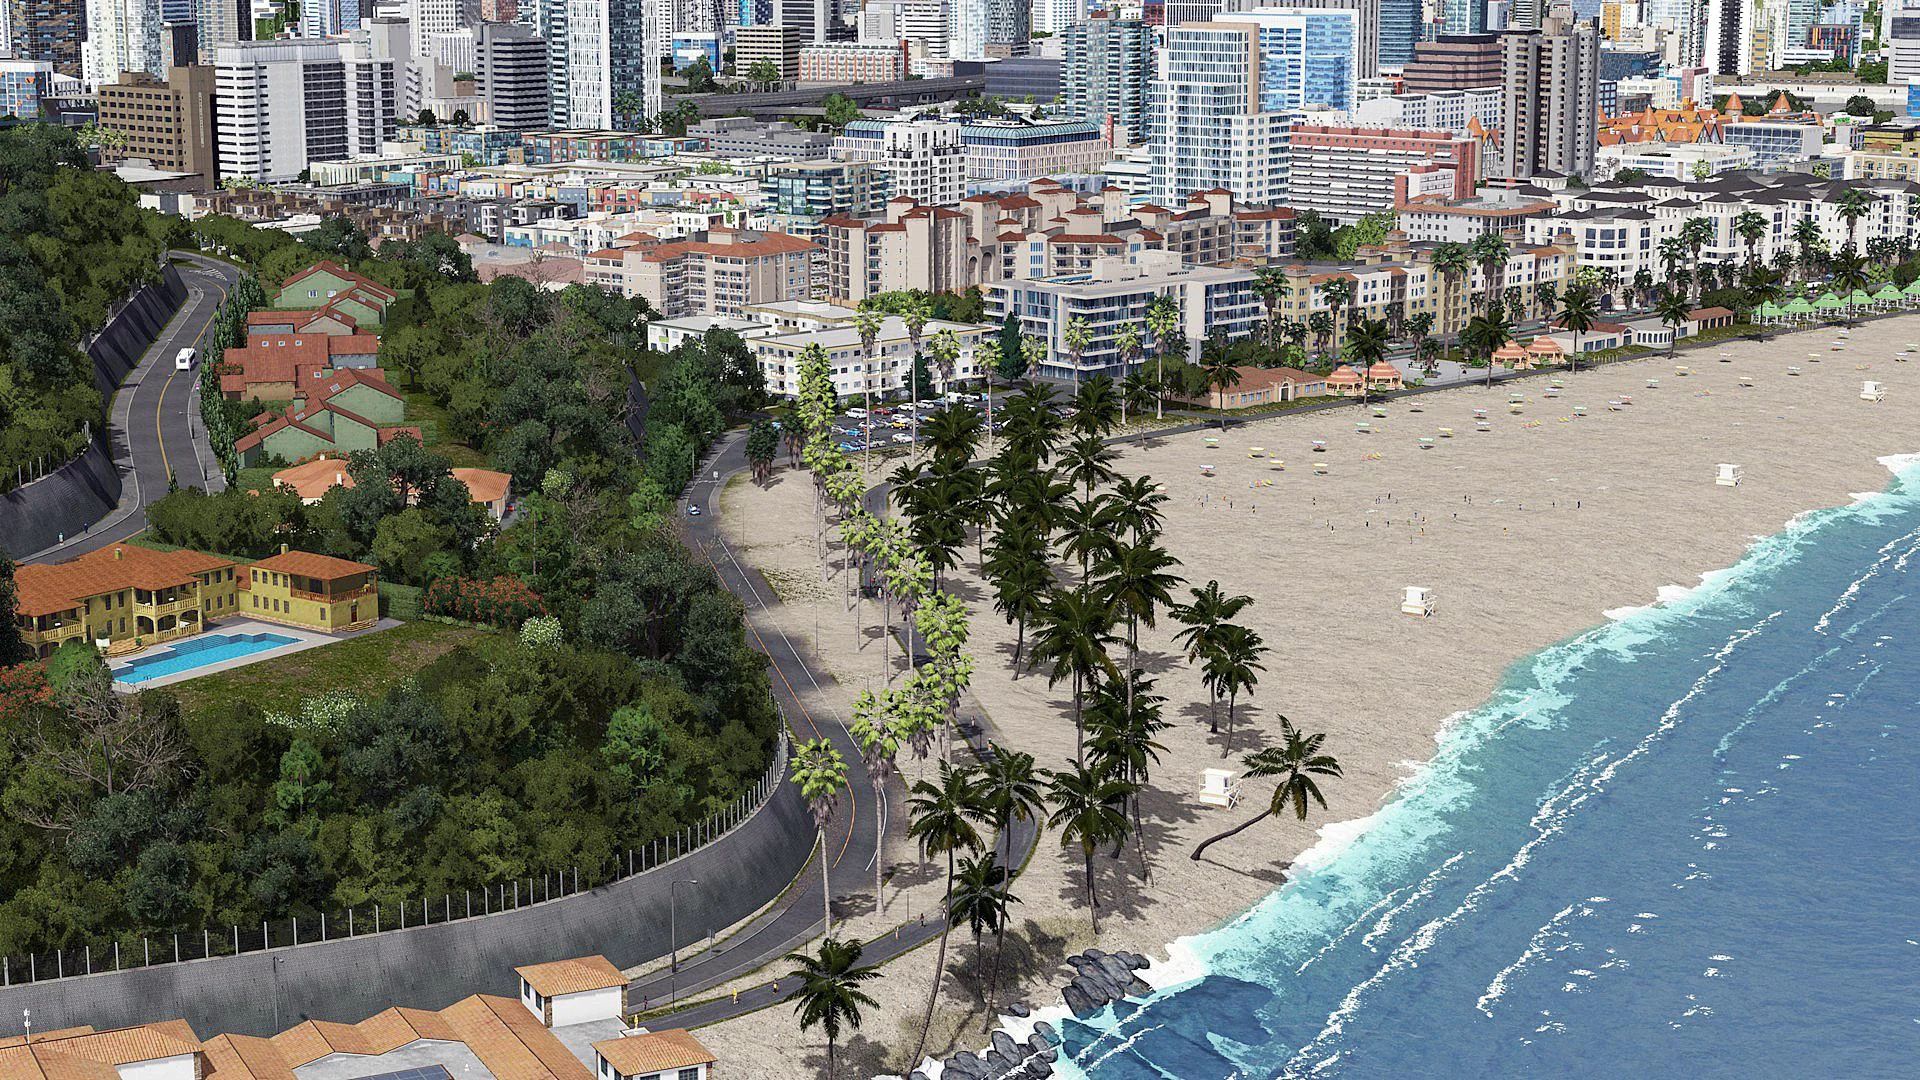 Cities Skylines II “Beach Properties”: A Beacon of Hope or Just More Fluff?